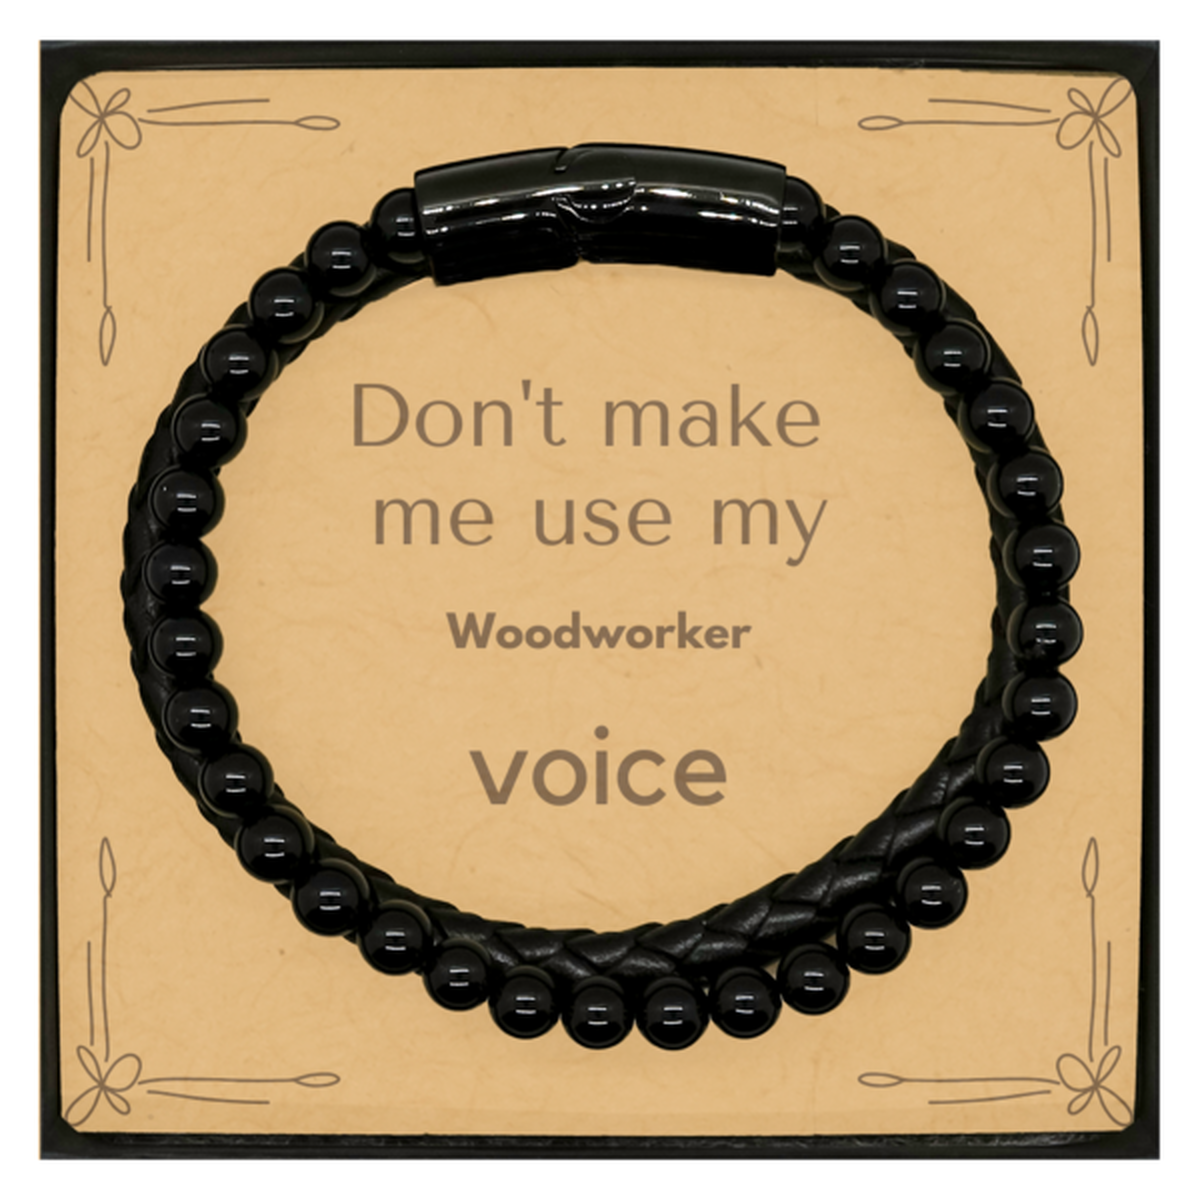 Don't make me use my Woodworker voice, Sarcasm Woodworker Card Gifts, Christmas Woodworker Stone Leather Bracelets Birthday Unique Gifts For Woodworker Coworkers, Men, Women, Colleague, Friends